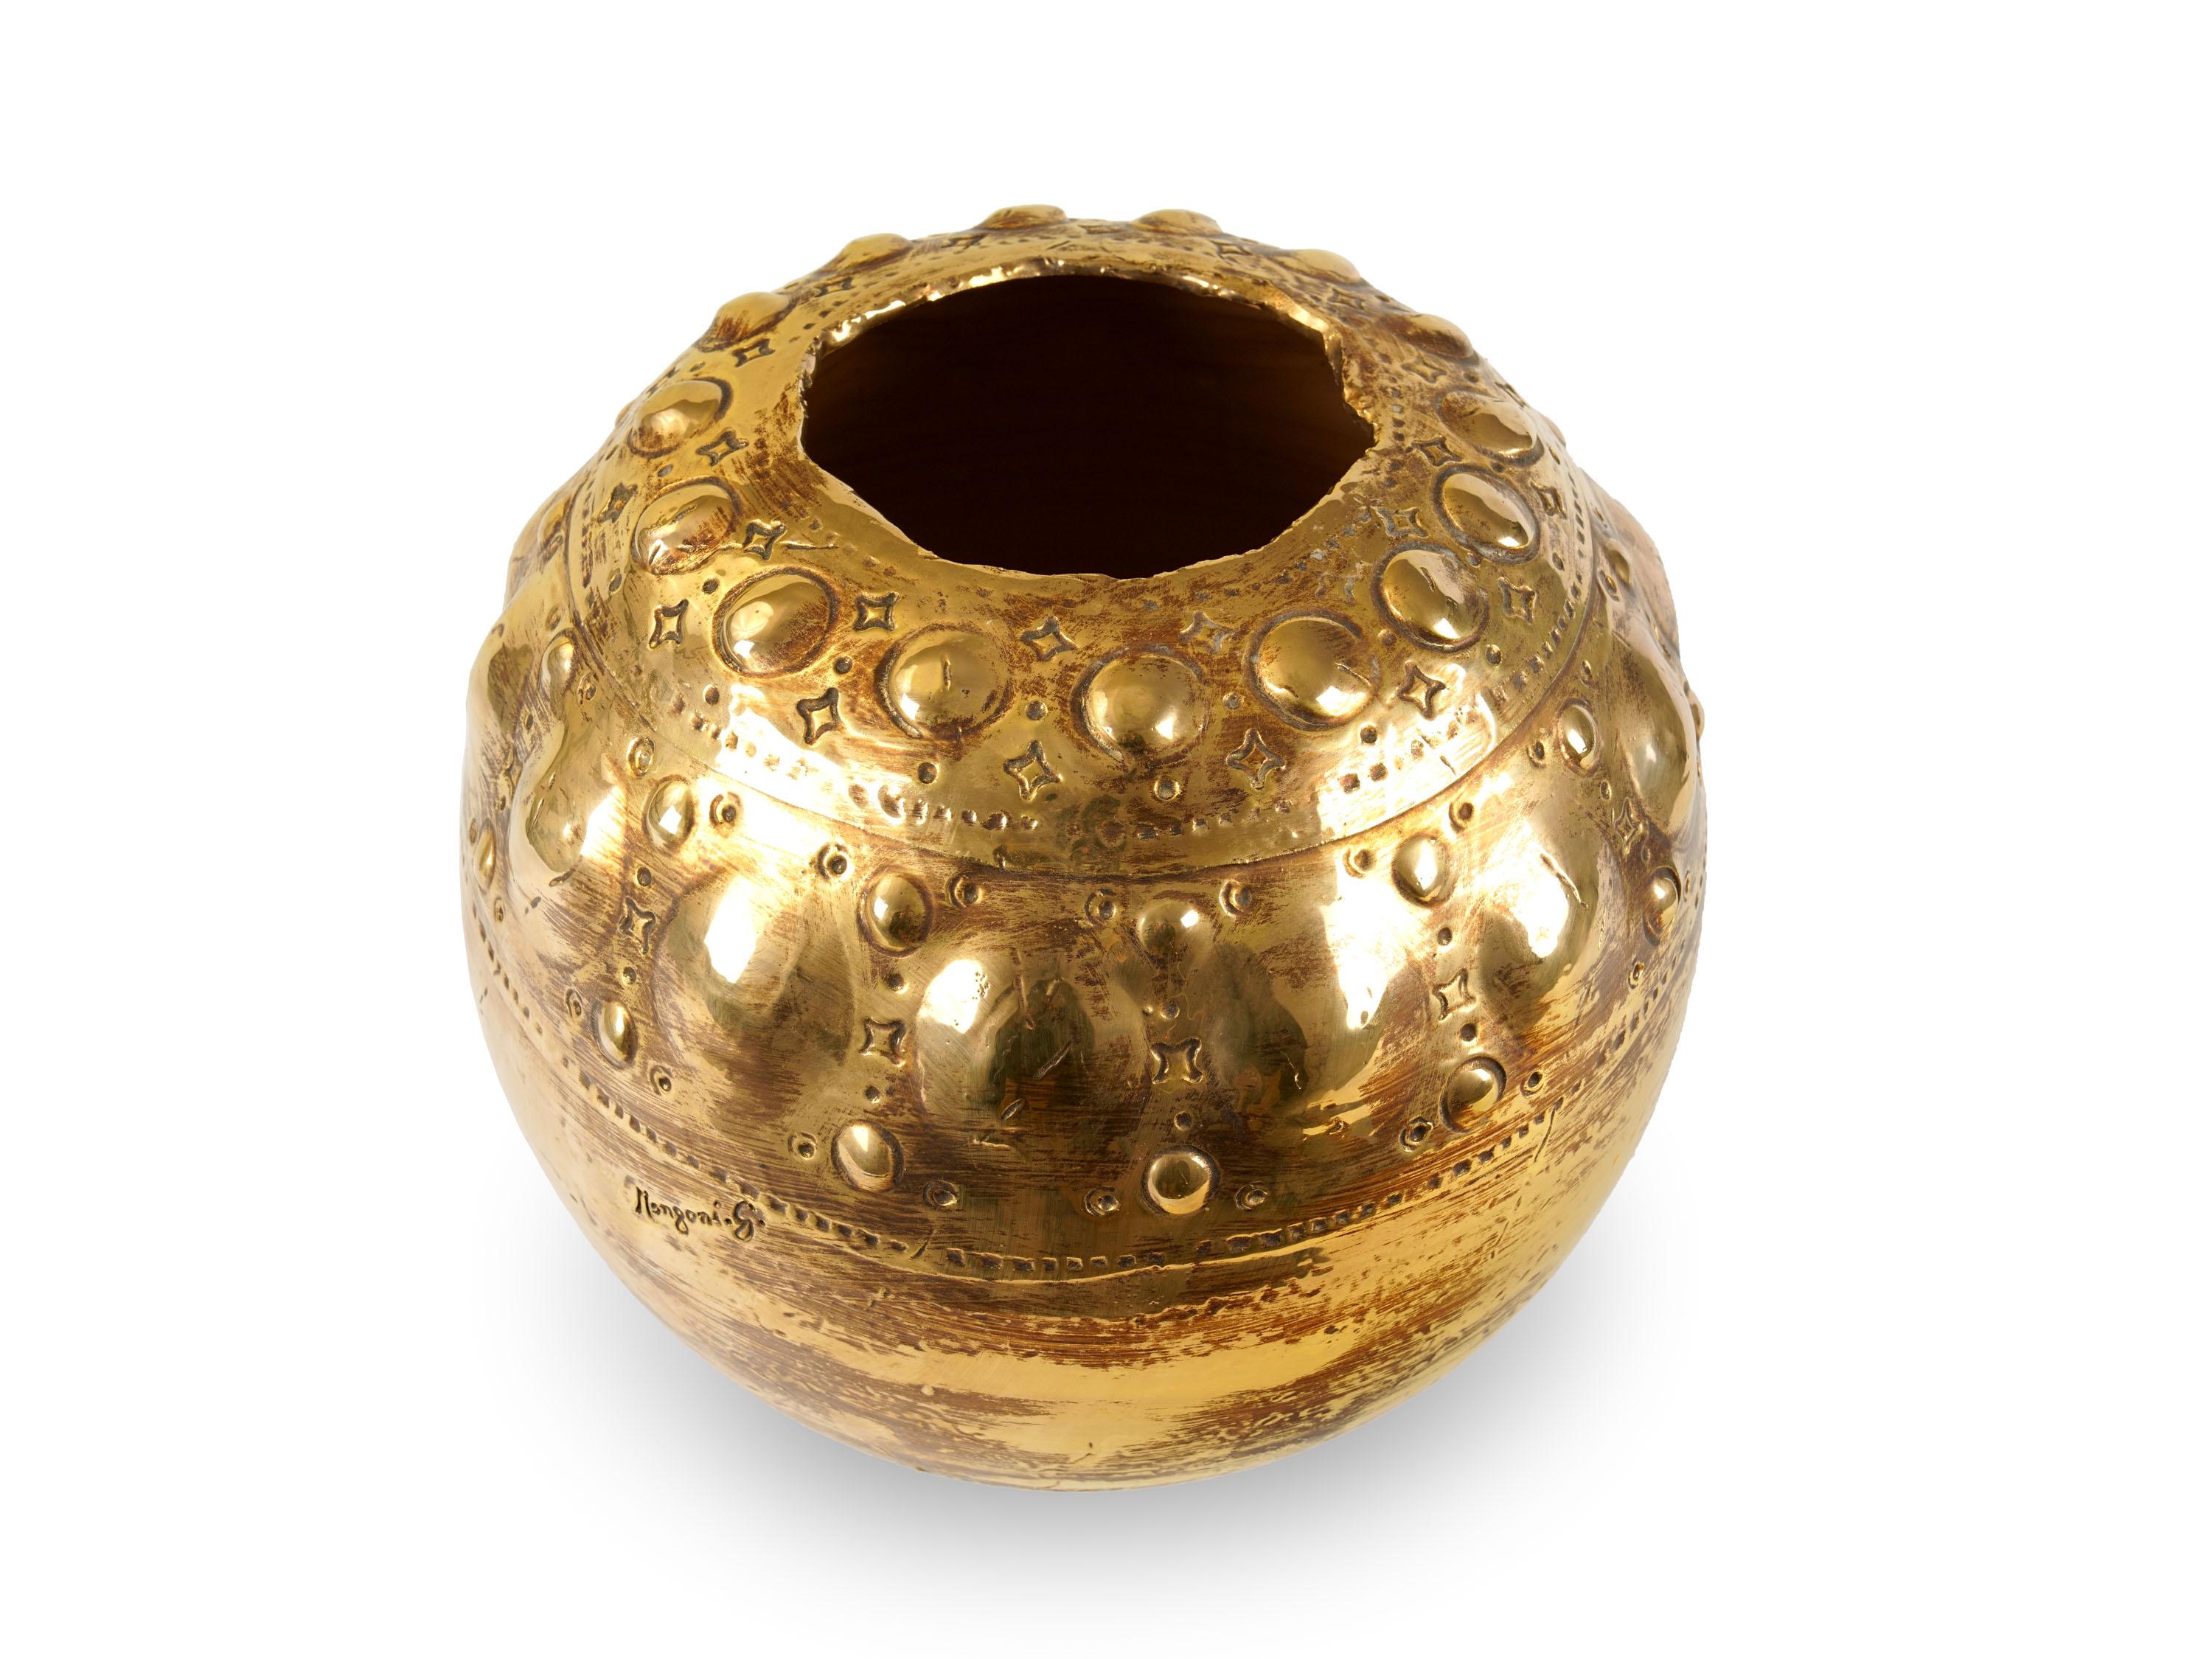 Sculptural vase handmade in Italy and decorated with the luster technique in 24 Kt gold. Dimensions: D 35 cm, H 40 cm. The entire manufacturing process is handmade in Italy.
The vase draws inspiration from one of the most characteristic products of